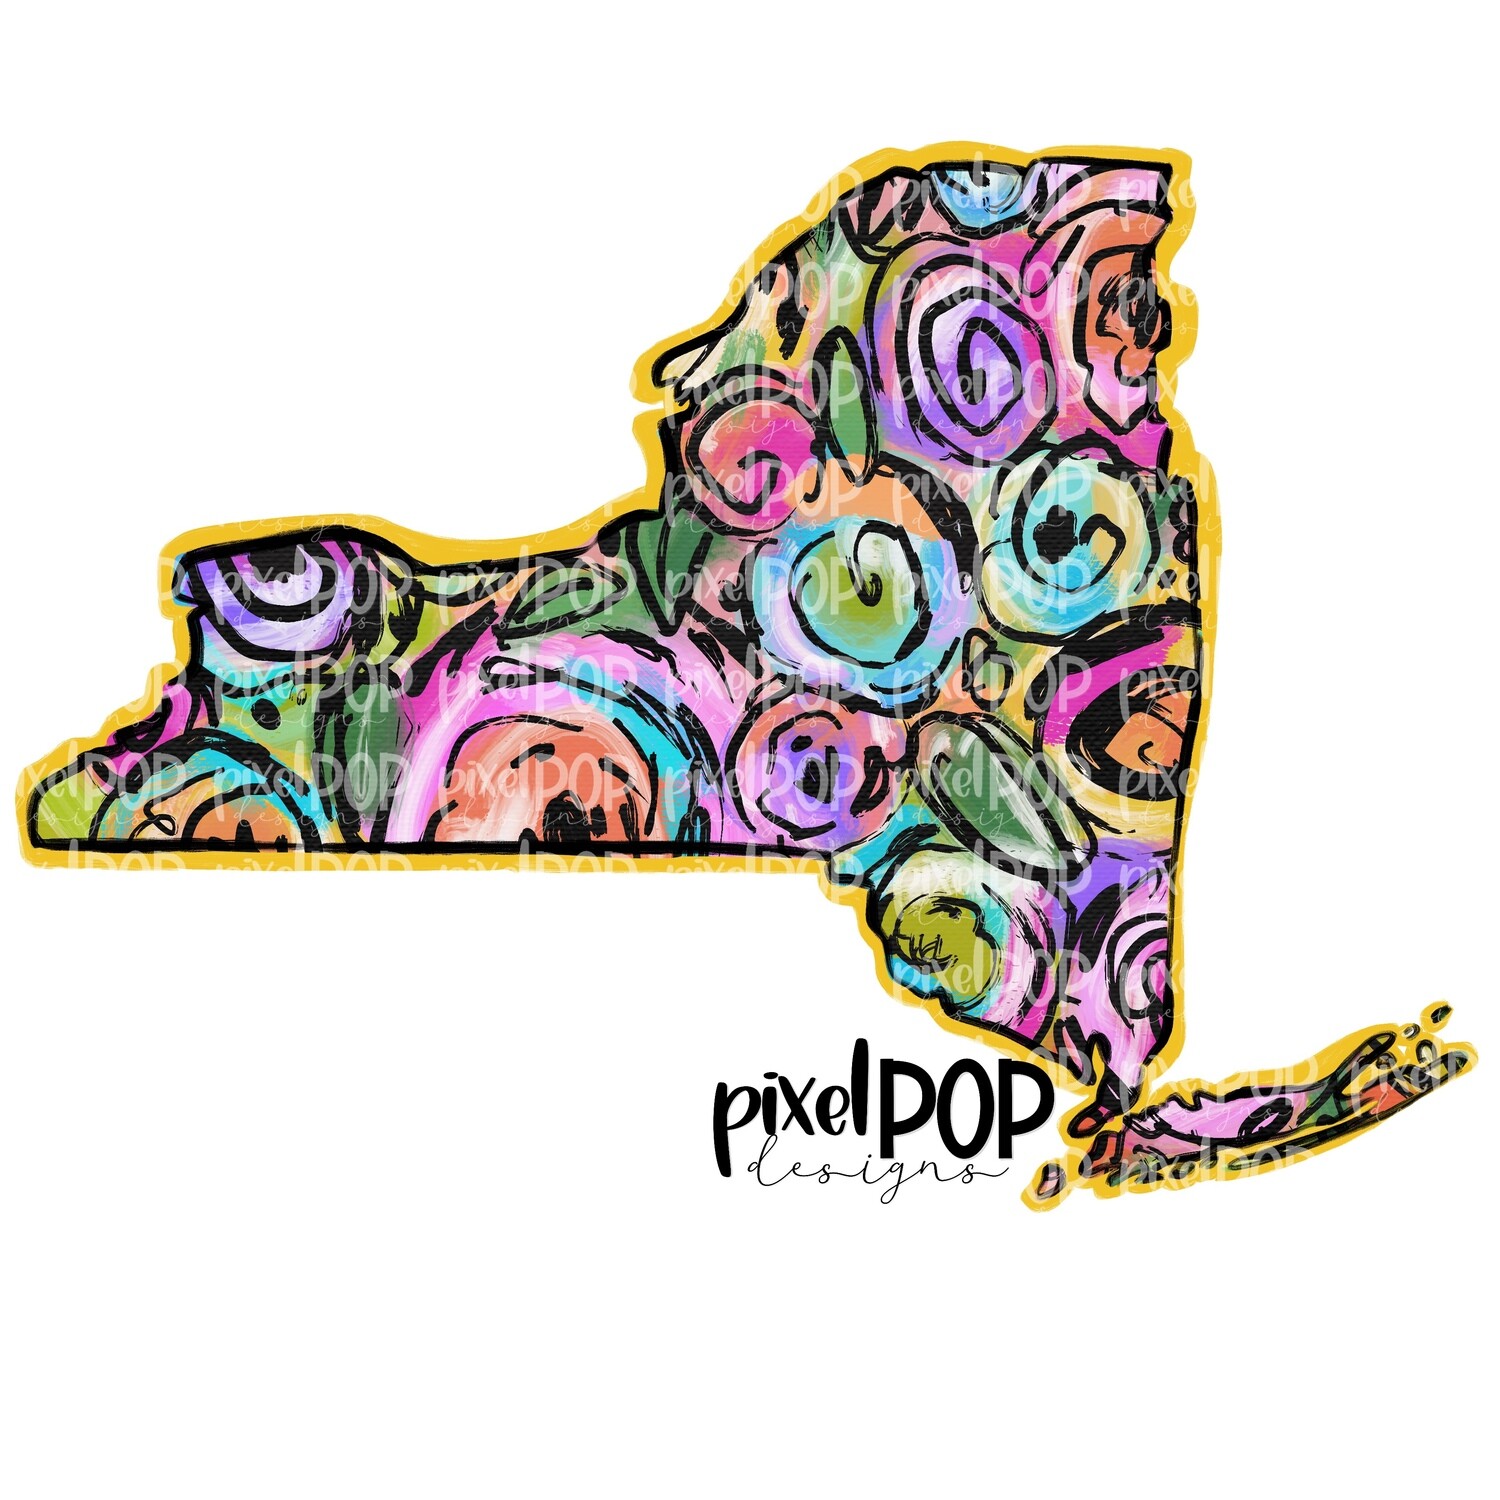 State of New York Shape on Floral Acrylic Canvas Digital PNG | New York NY | Home State | Heat Transfer | Digital | Floral State Shape